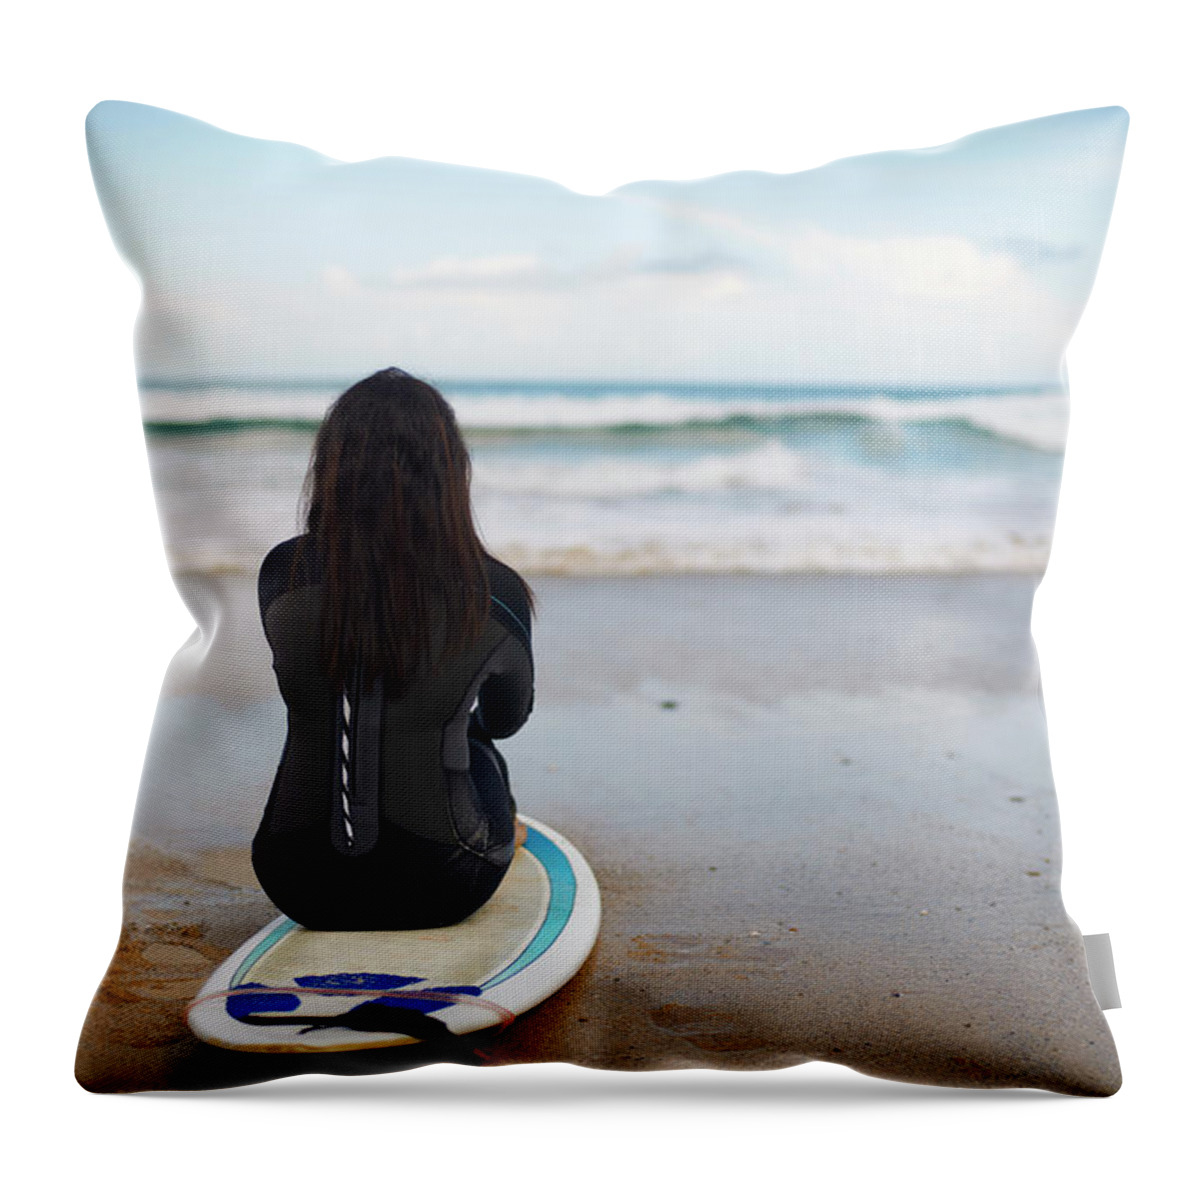 Tranquility Throw Pillow featuring the photograph Surfer Sitting On Board On Beach by Peter Muller